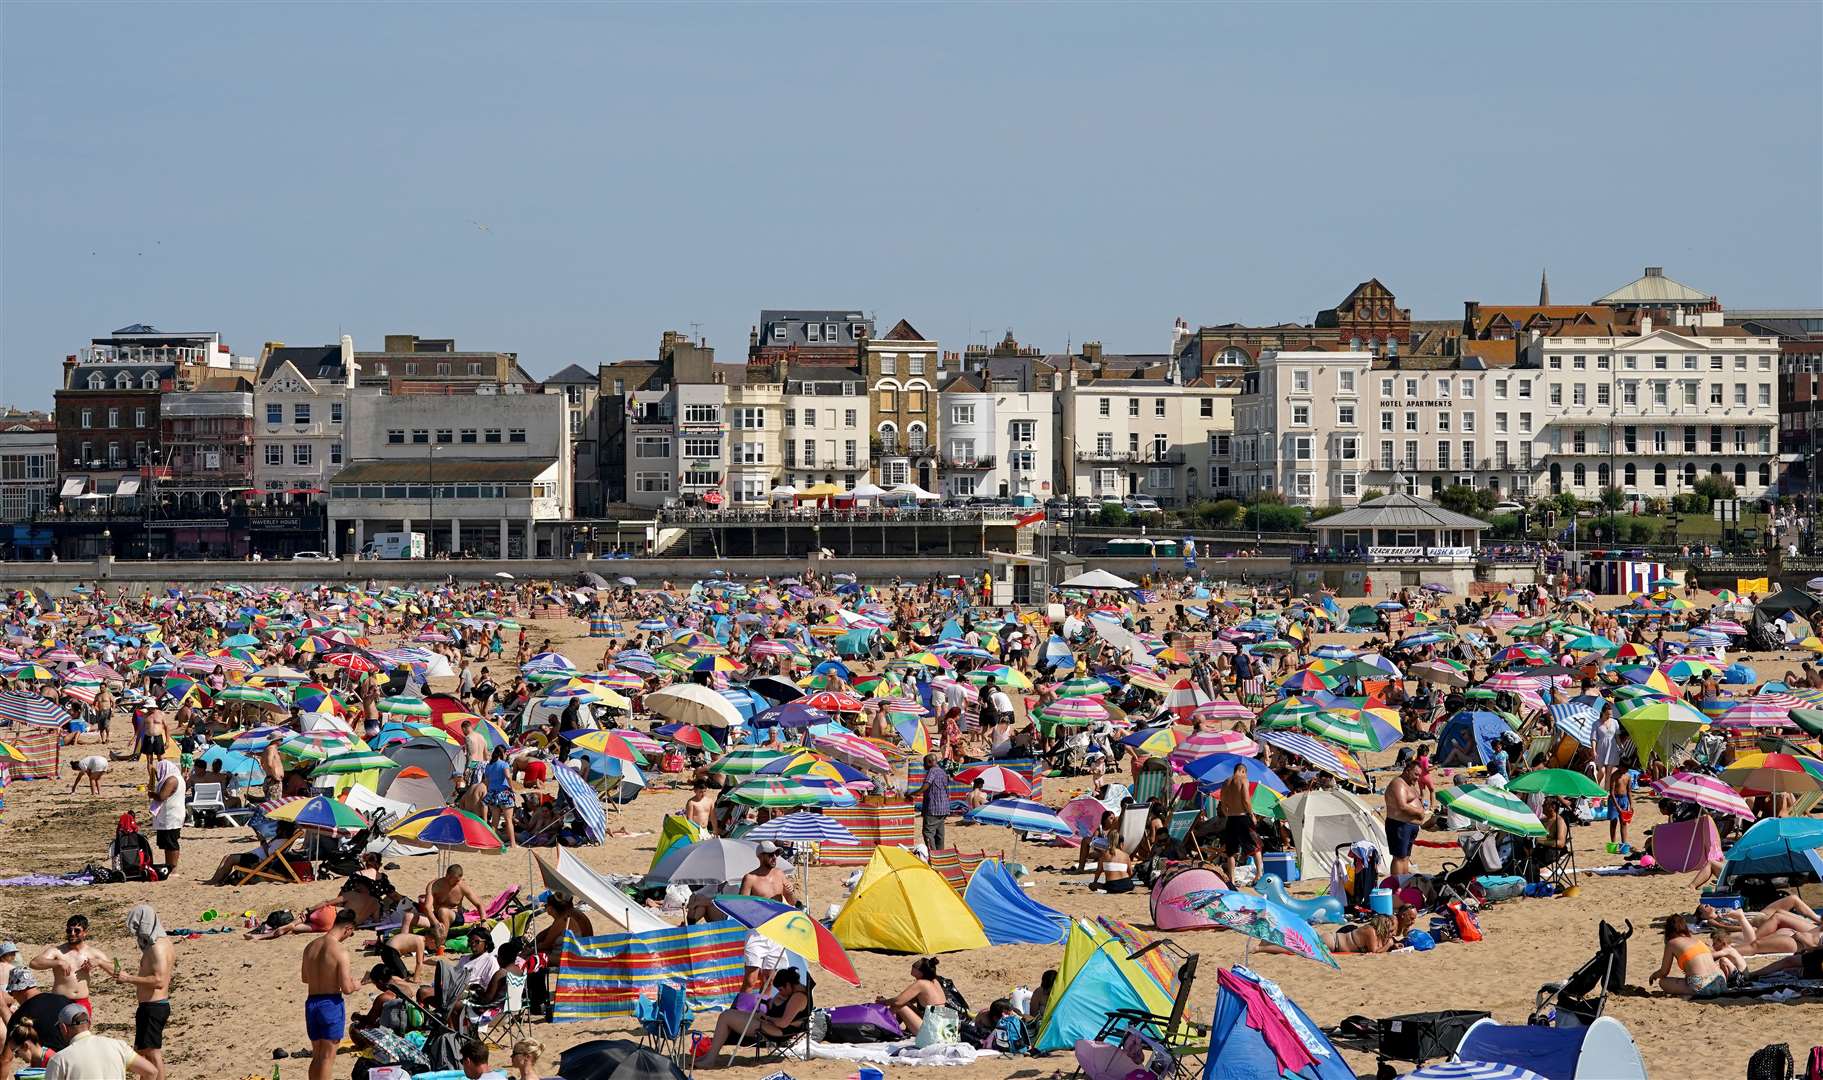 Sunseekers heading to the beach to bask in the sunny weather should use at least SPF factor 30 sunscreen in order to avoid sunburn, it was advised (Gareth Fuller/PA)